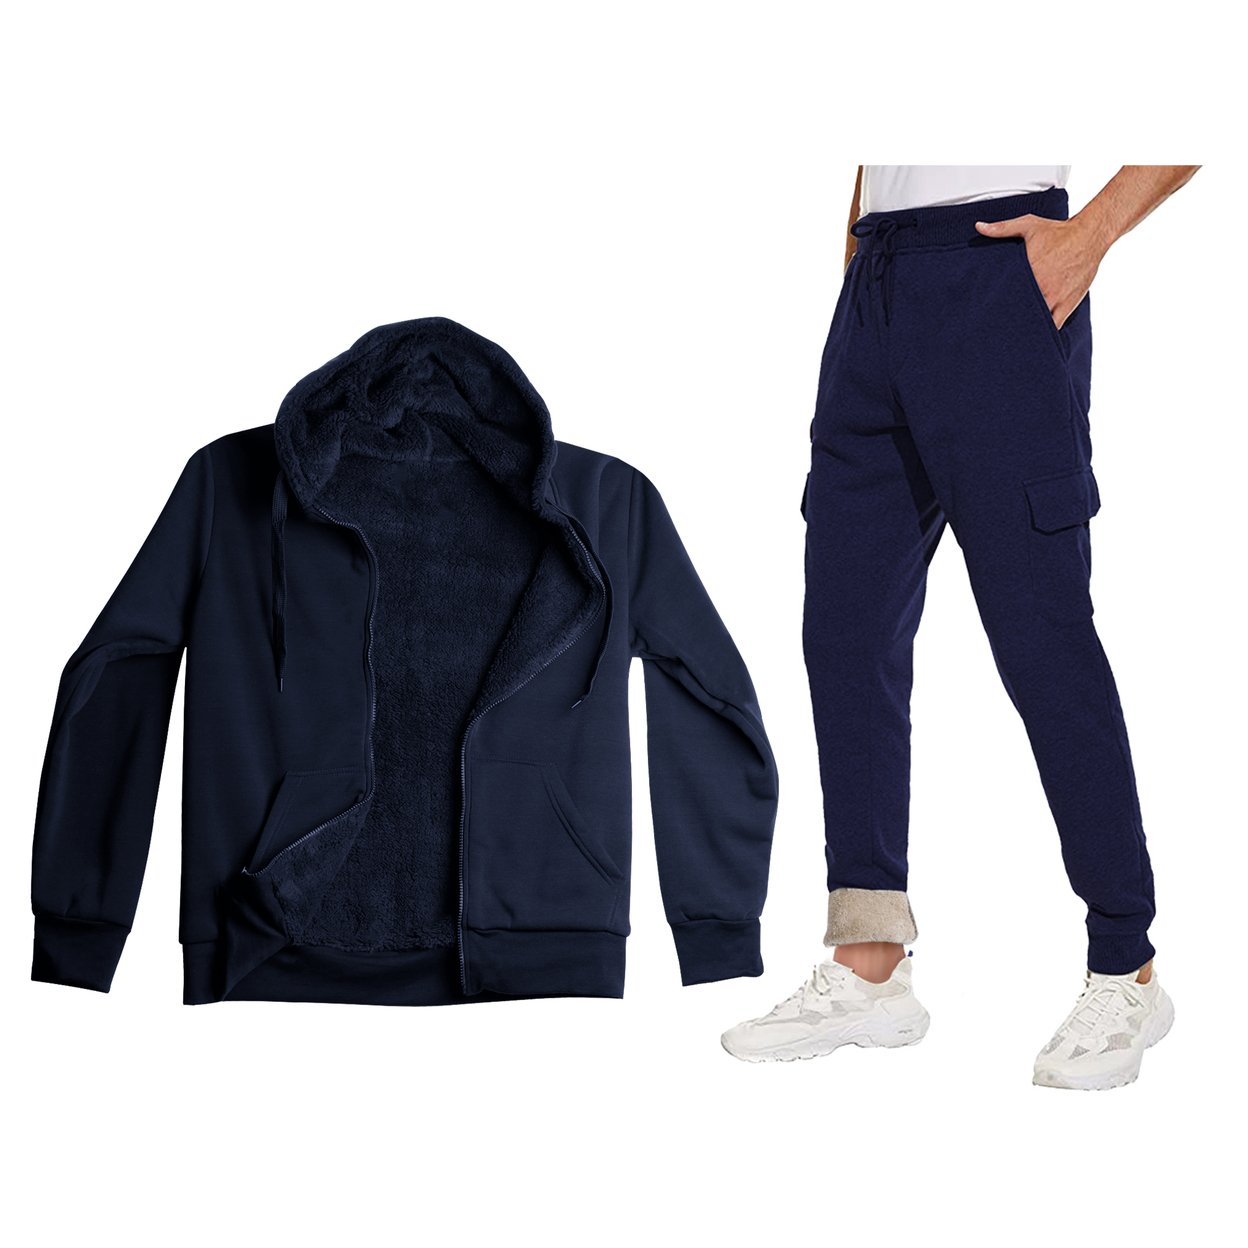 Men's Big & Tall Casual Super Soft Winter Warm Thick Sherpa Lined Sweatsuit Jogger Set - Navy, Small